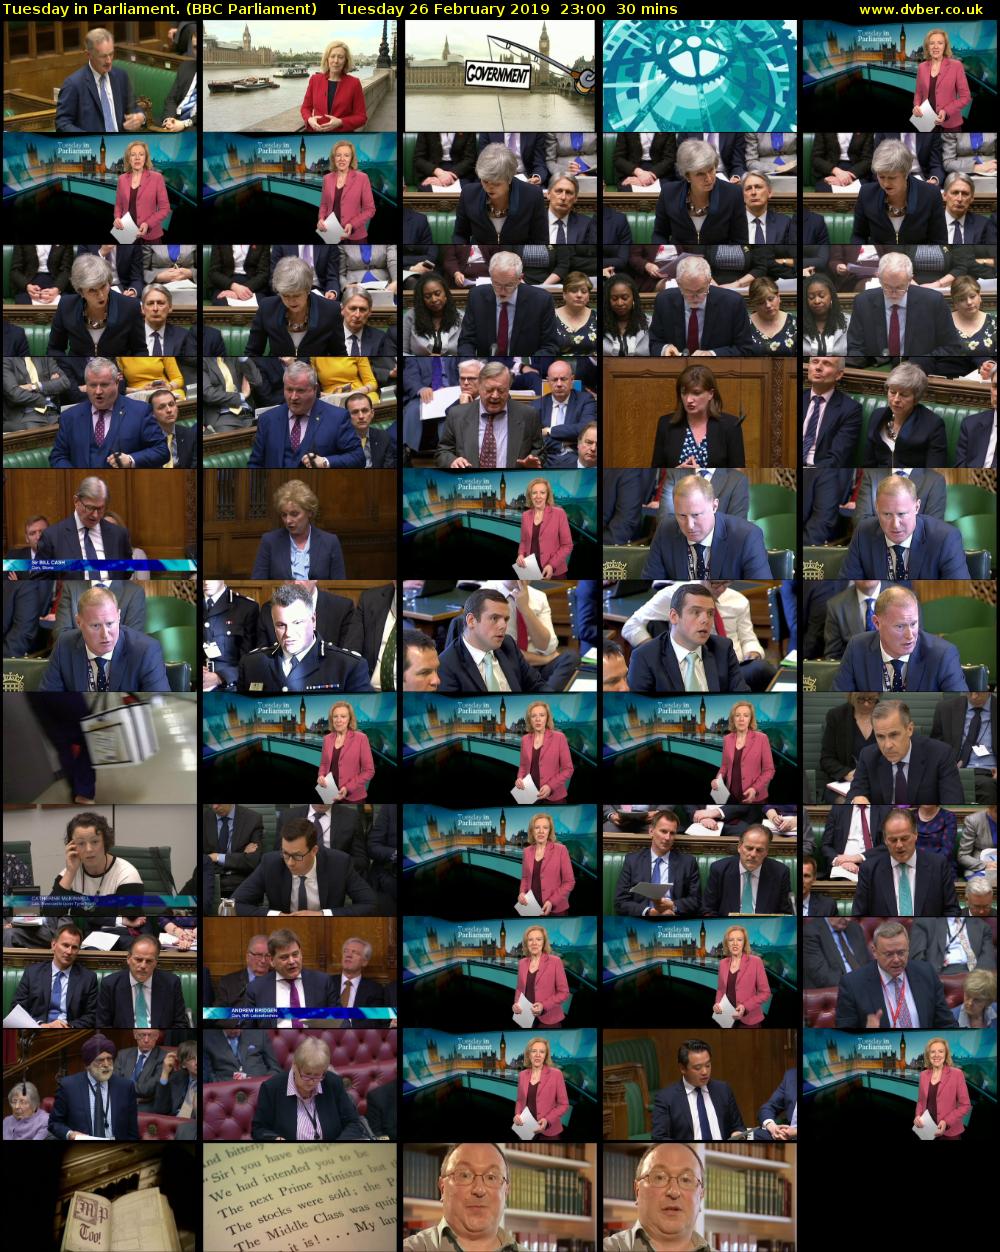 Tuesday in Parliament. (BBC Parliament) Tuesday 26 February 2019 23:00 - 23:30